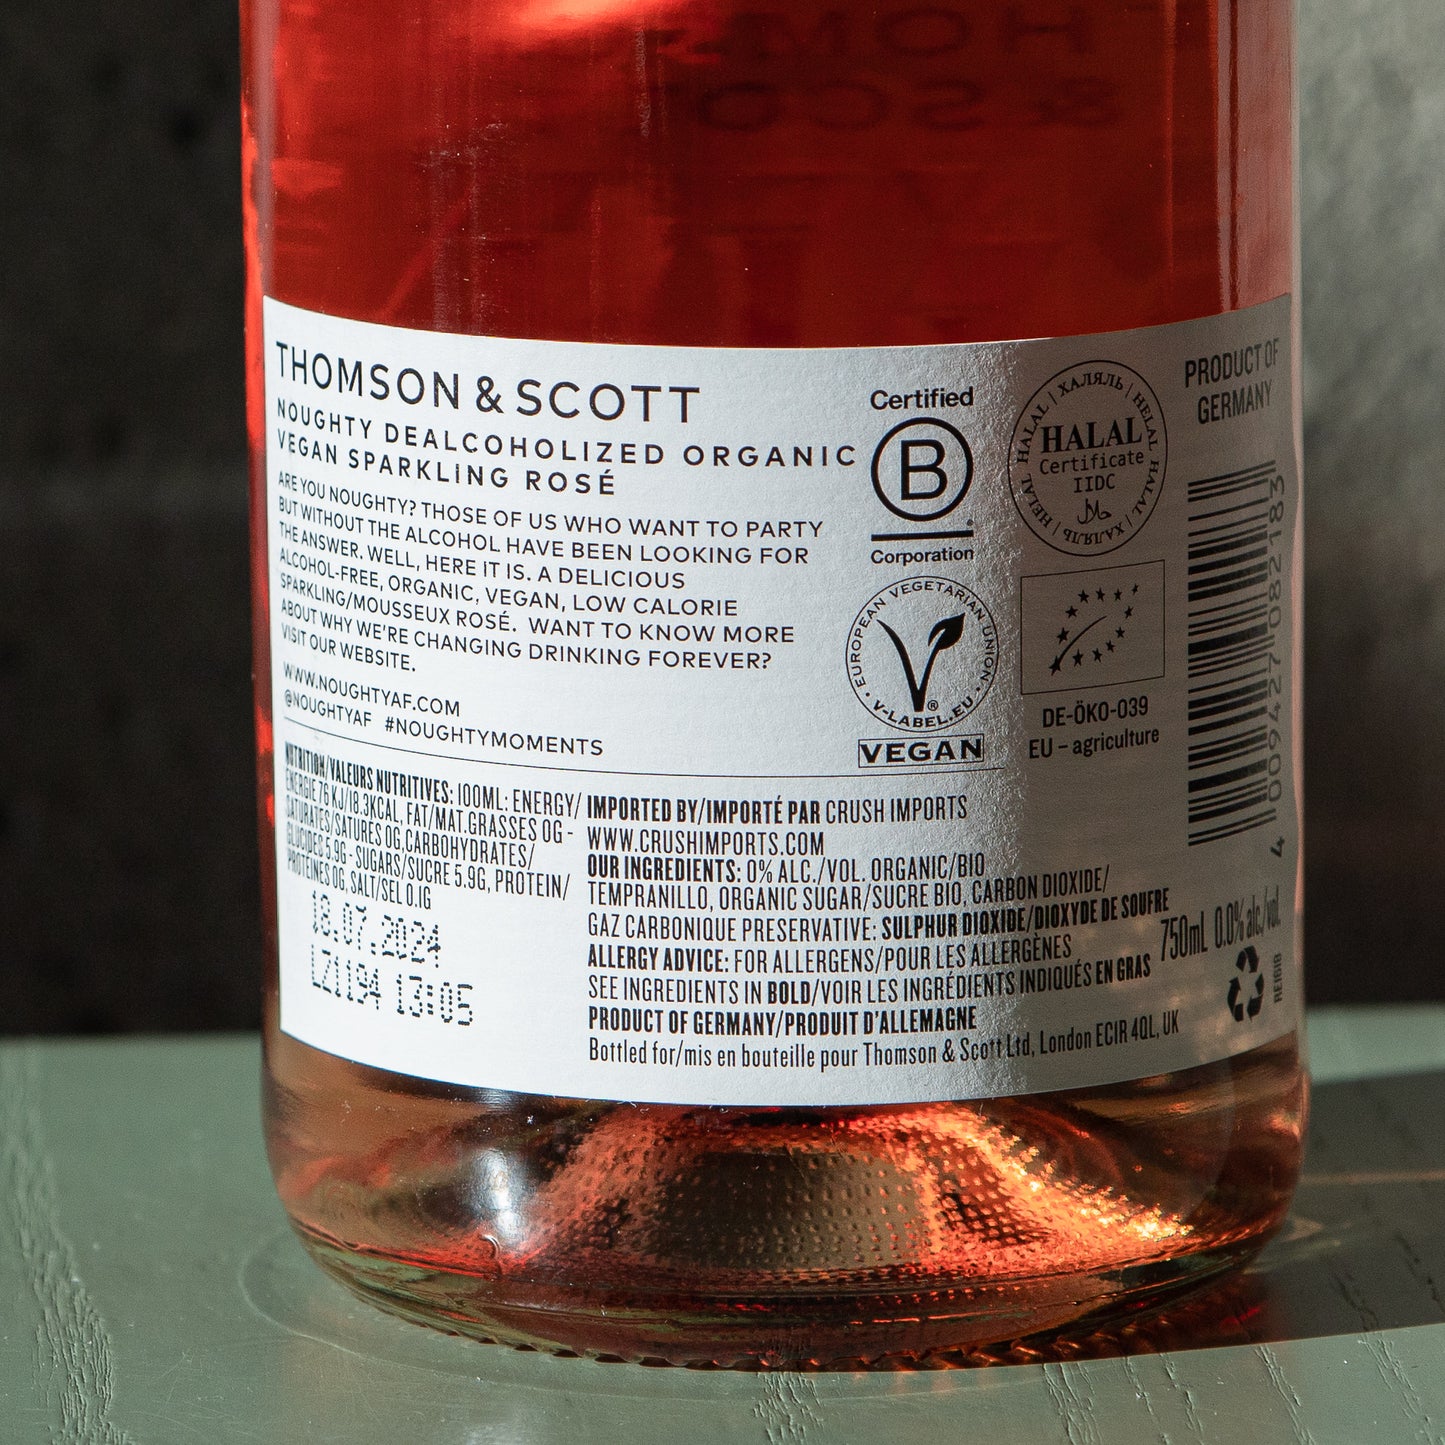 'Noughty' Sparkling Rosé by Thomson and Scott